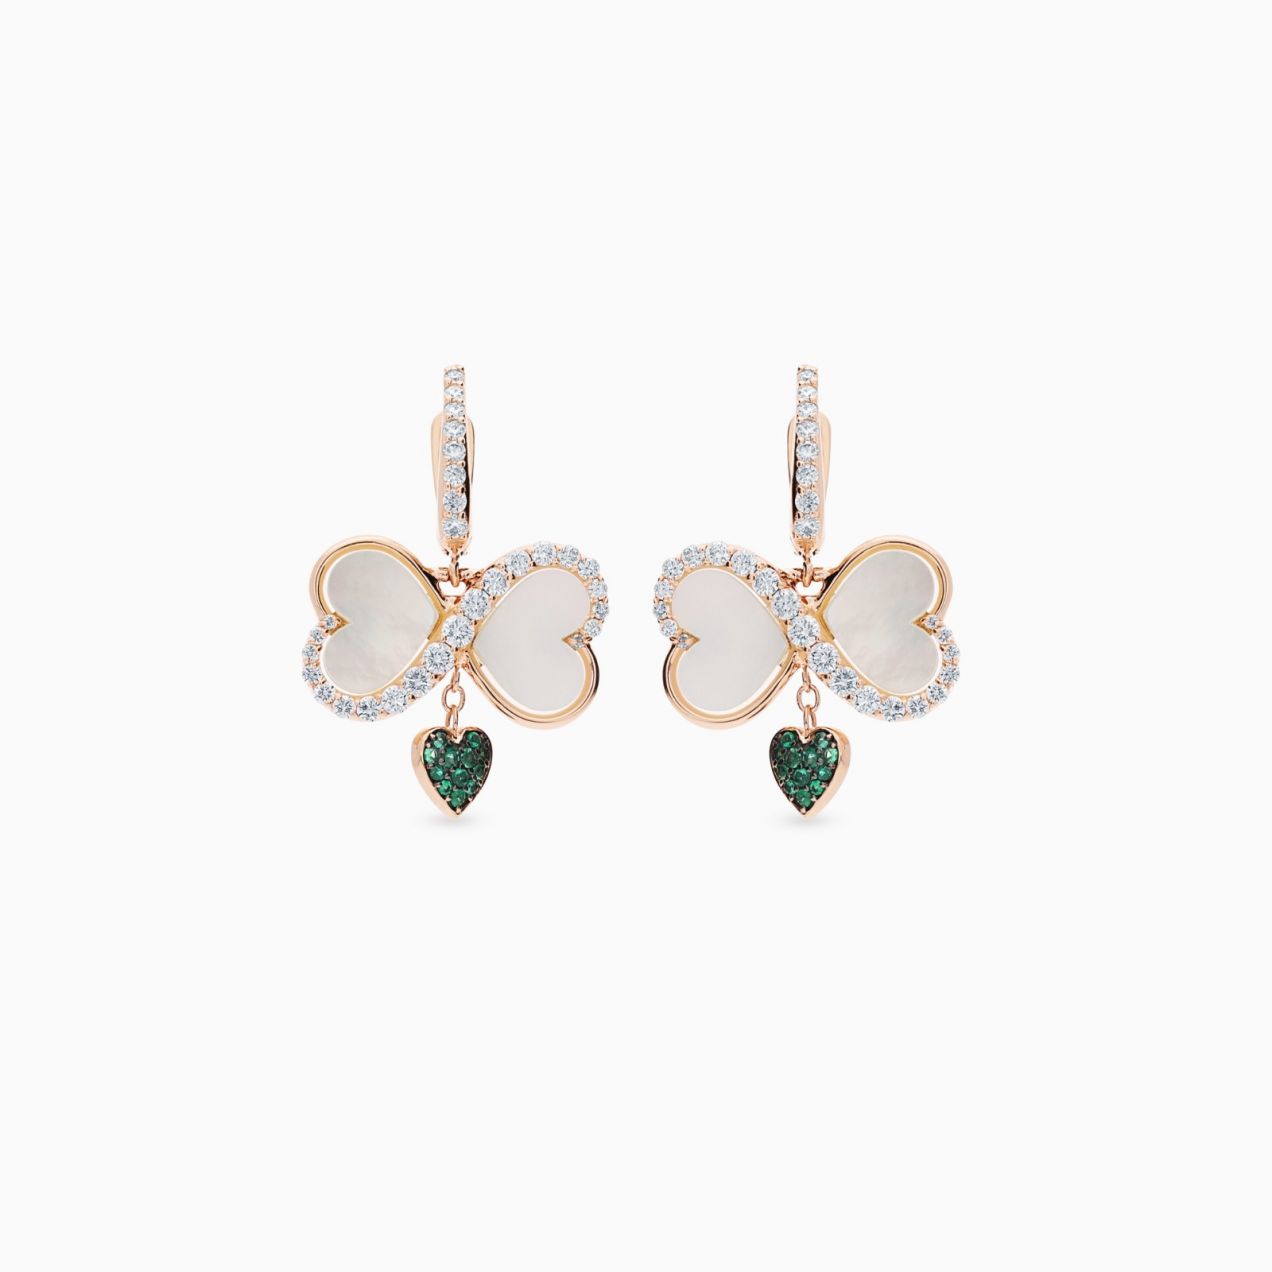 White gold infinity symbol earrings with heart-cut mother of pearl and heart motif with emeralds 